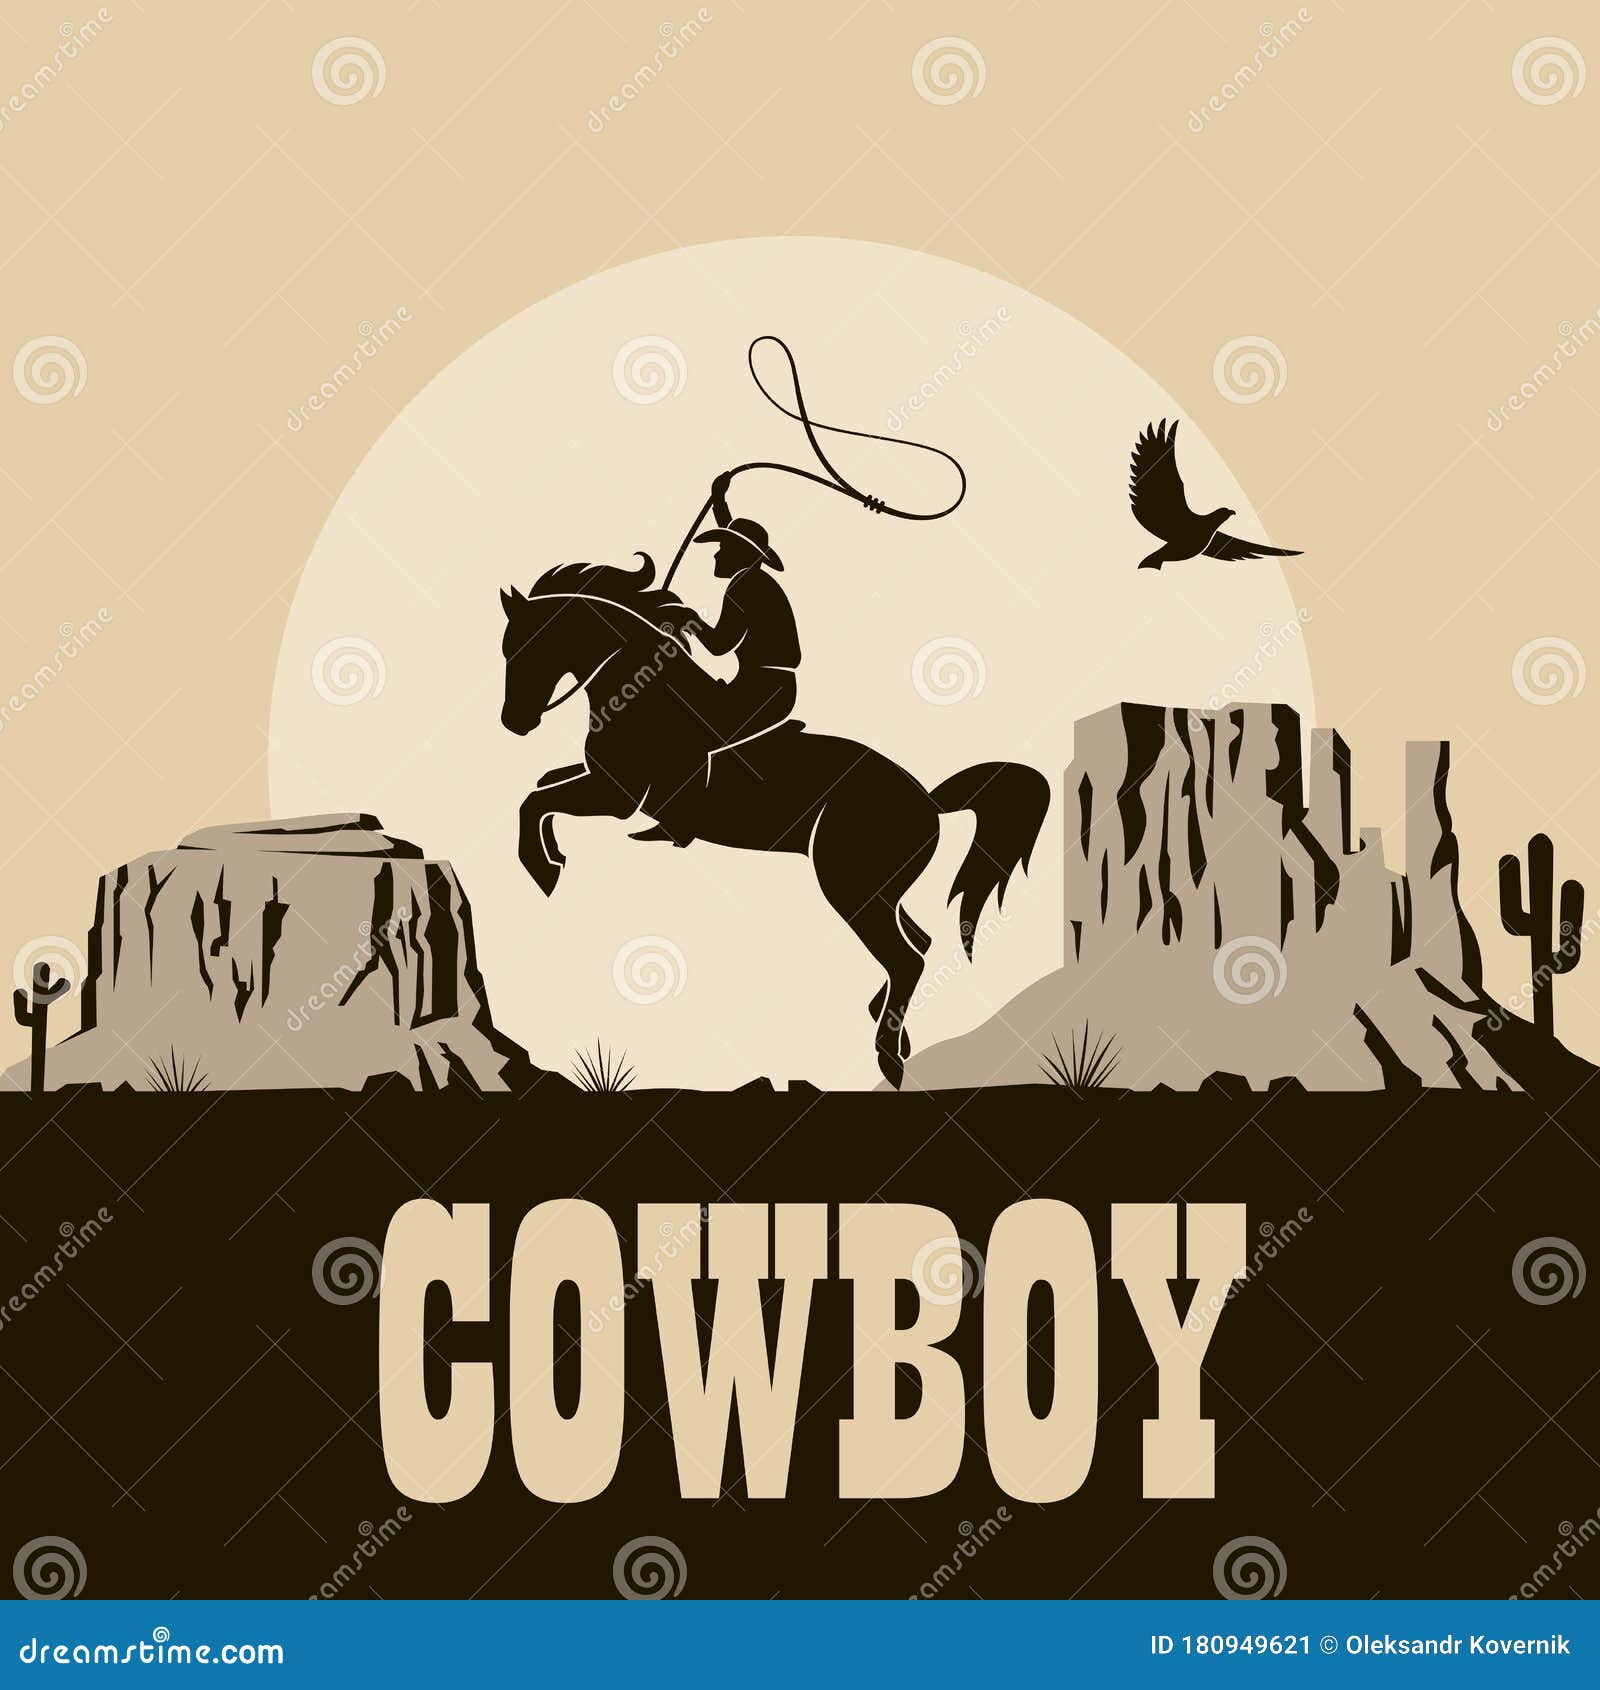 Cowboy Silhouette Illustration Stock Vector - Illustration of rodeo ...